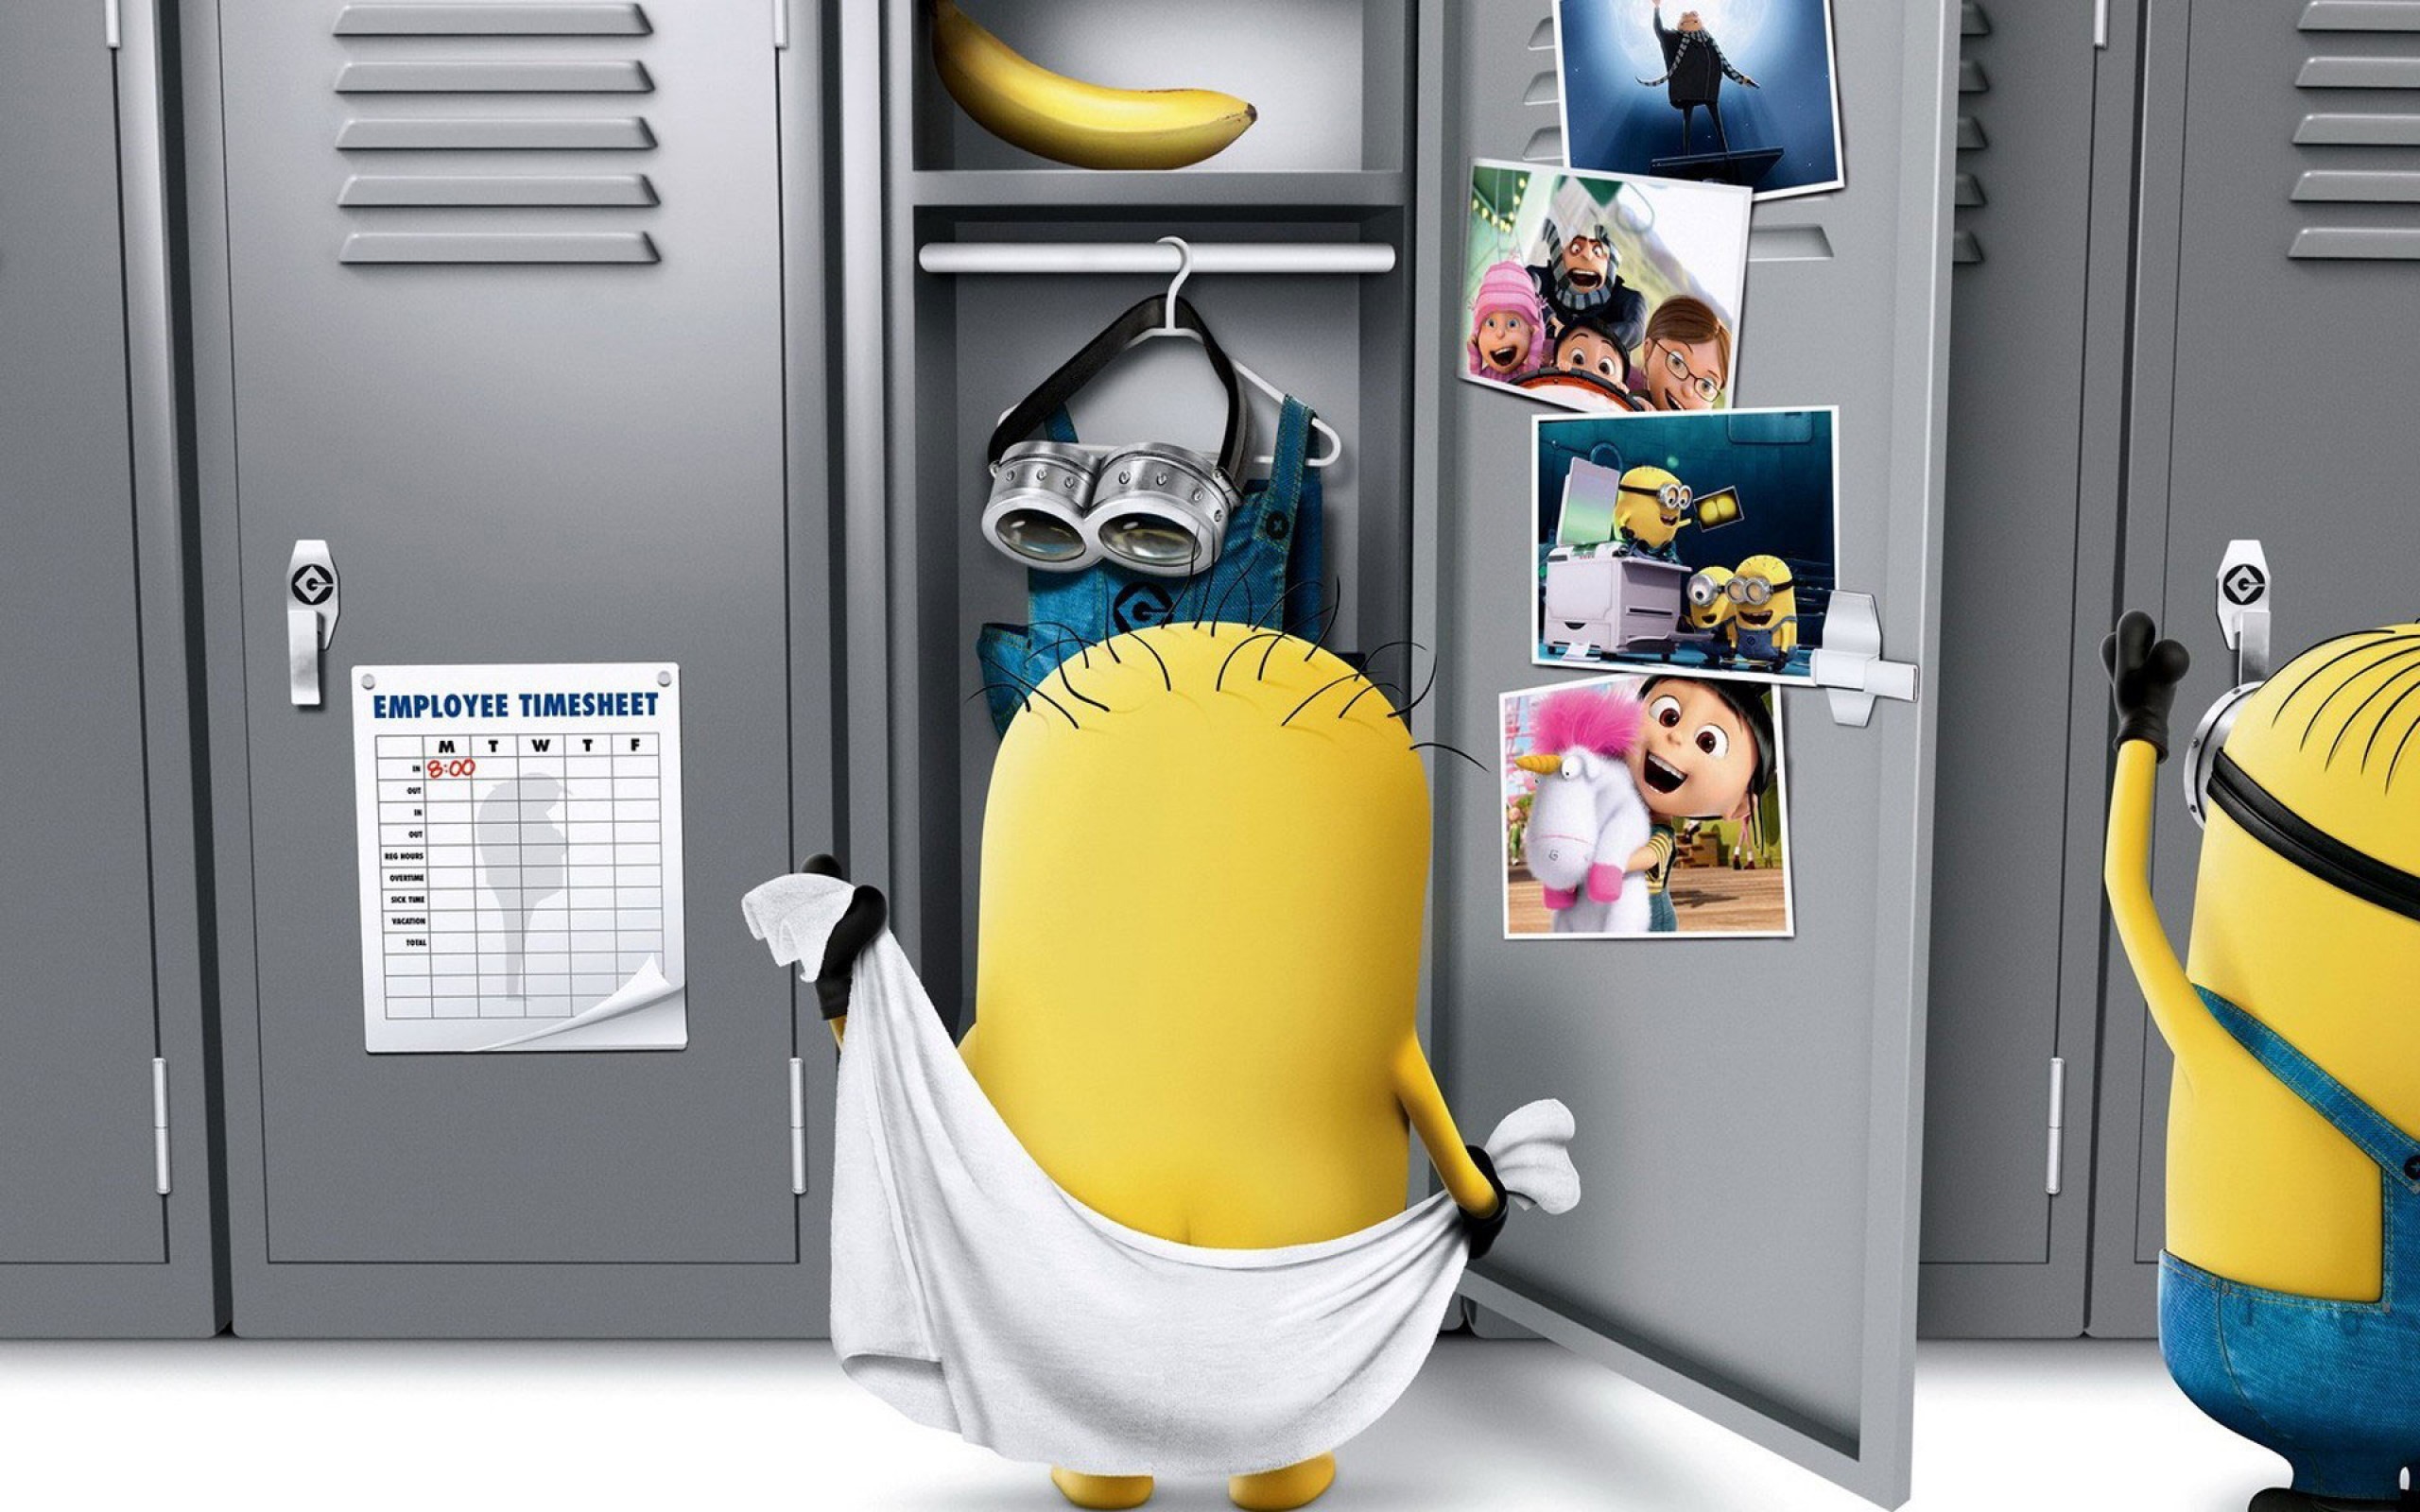 2560x1600 Best despicable me 2 picture - despicable me 2 category